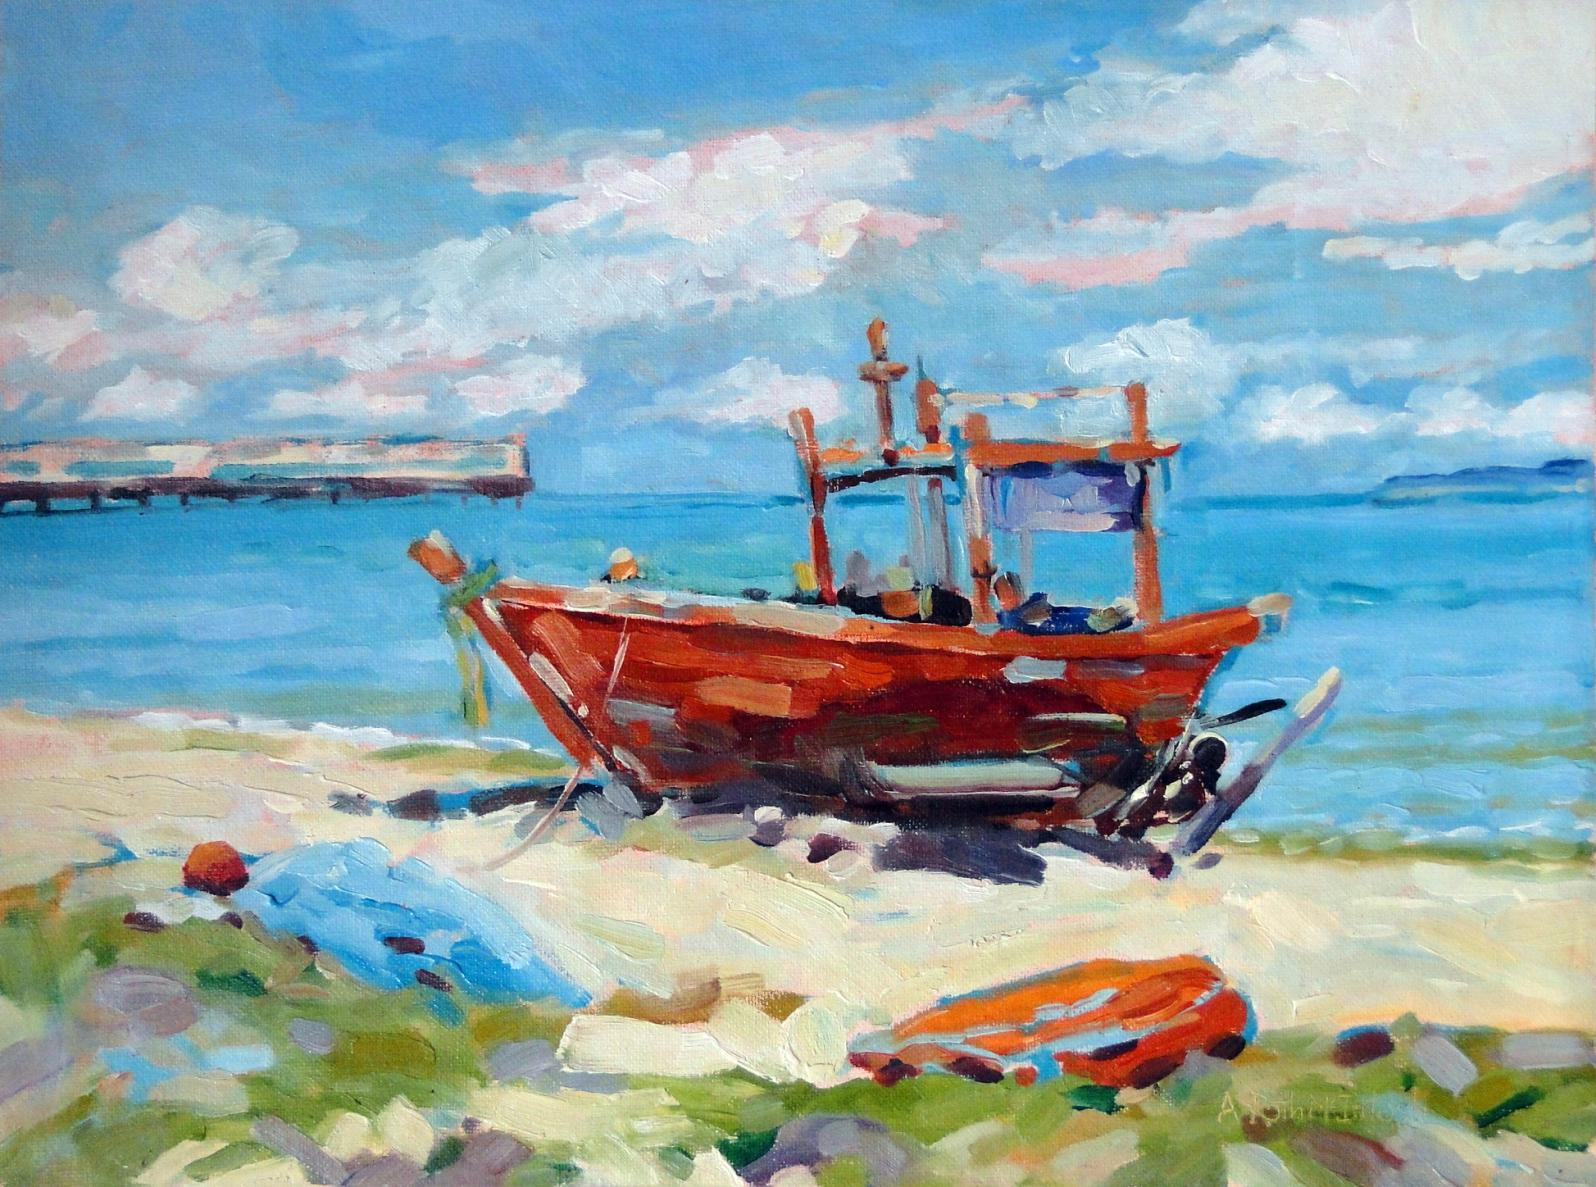 Rusty Boat, 12x16 plein
                  air piece in oil by Angie Roth McIntosh